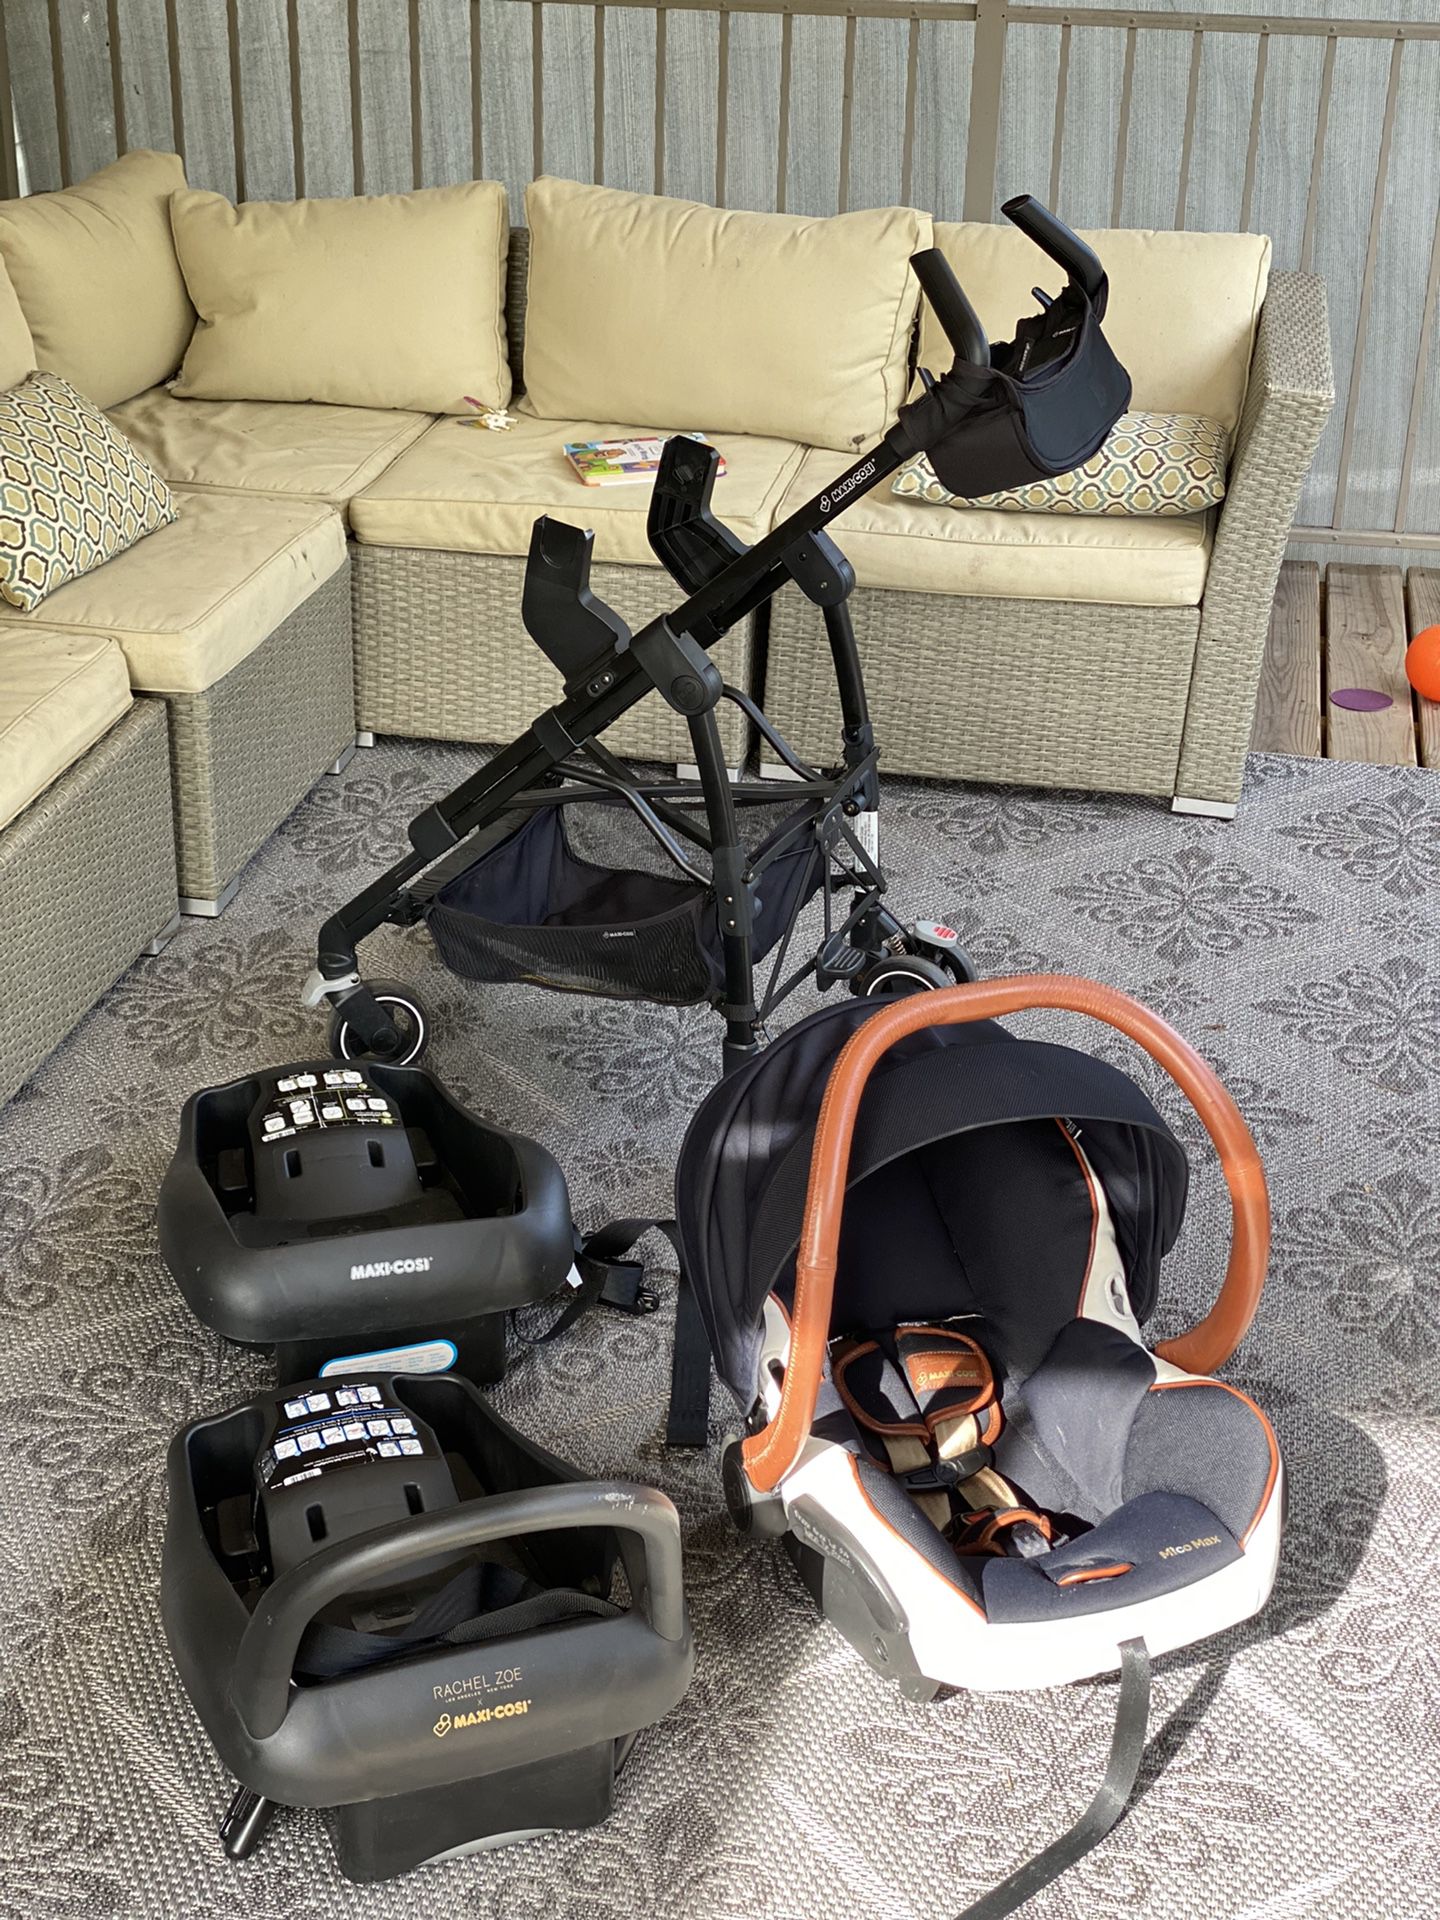 Maxi cosi Limited Edition Infant Carseat With 2 Bases -and Maxi Taxi Stroller